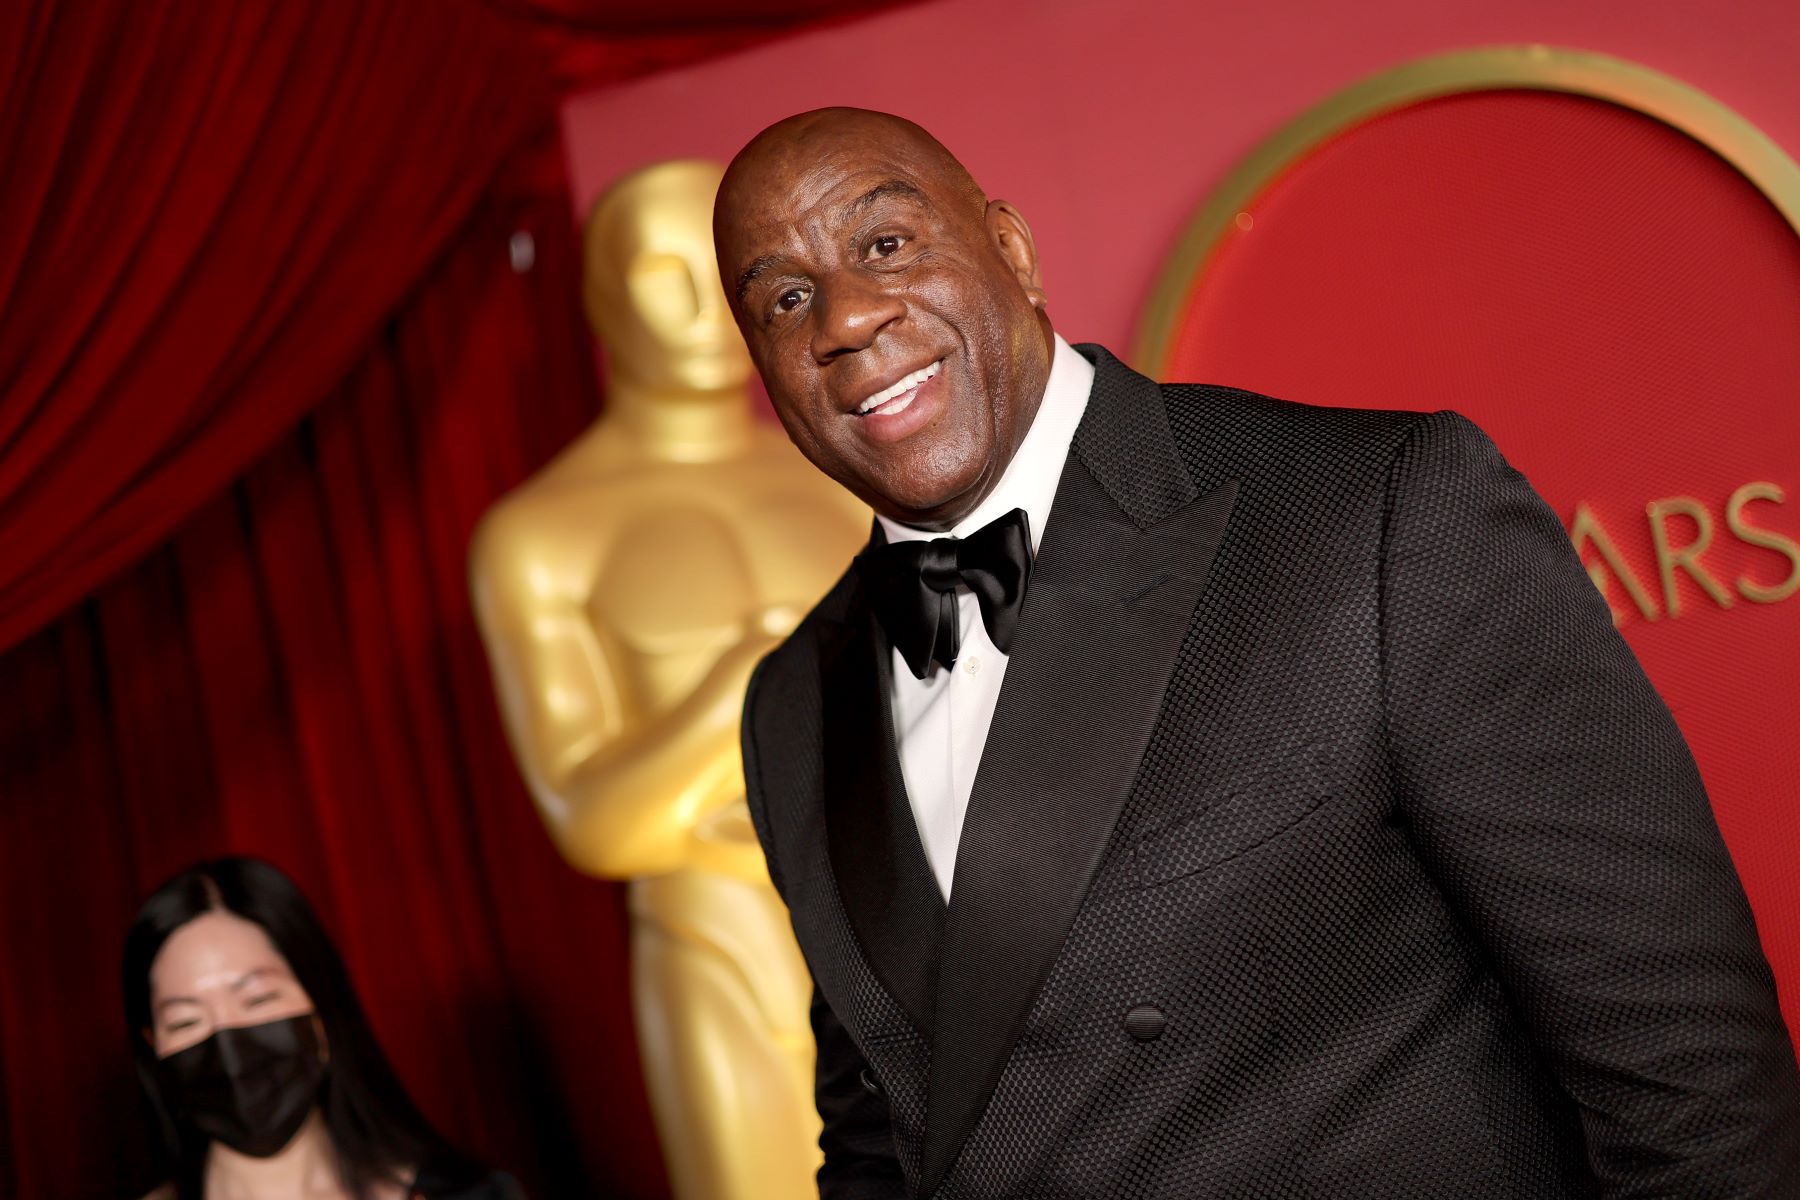 Former NBA Los Angeles Lakers superstar Magic Johnson attending the Governor Awards in Hollywood, California